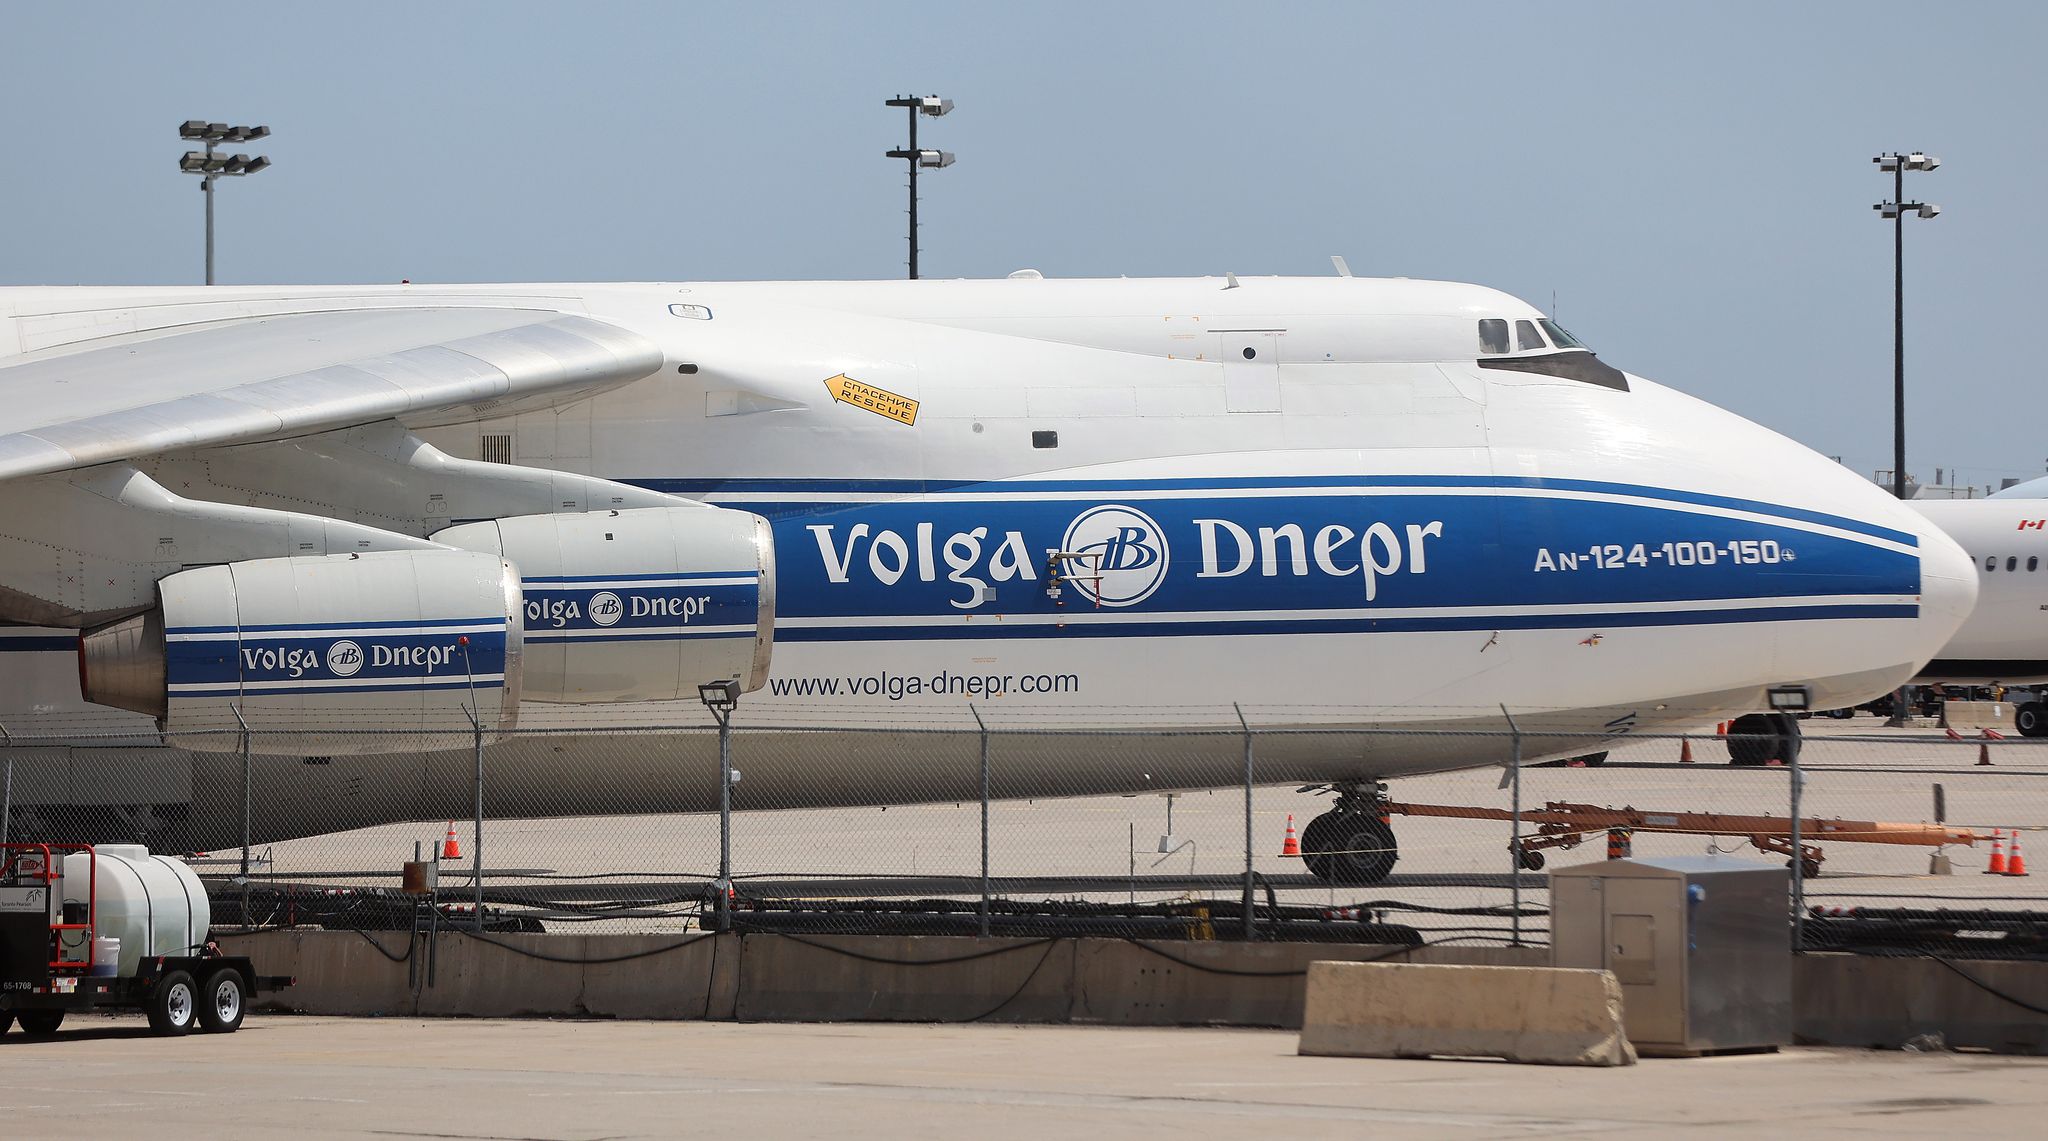 volga dnepr airlines antonov an 124, one of the largest production cargo planes in the world was grounded at pearson international airport in late february after russia invaded ukraine